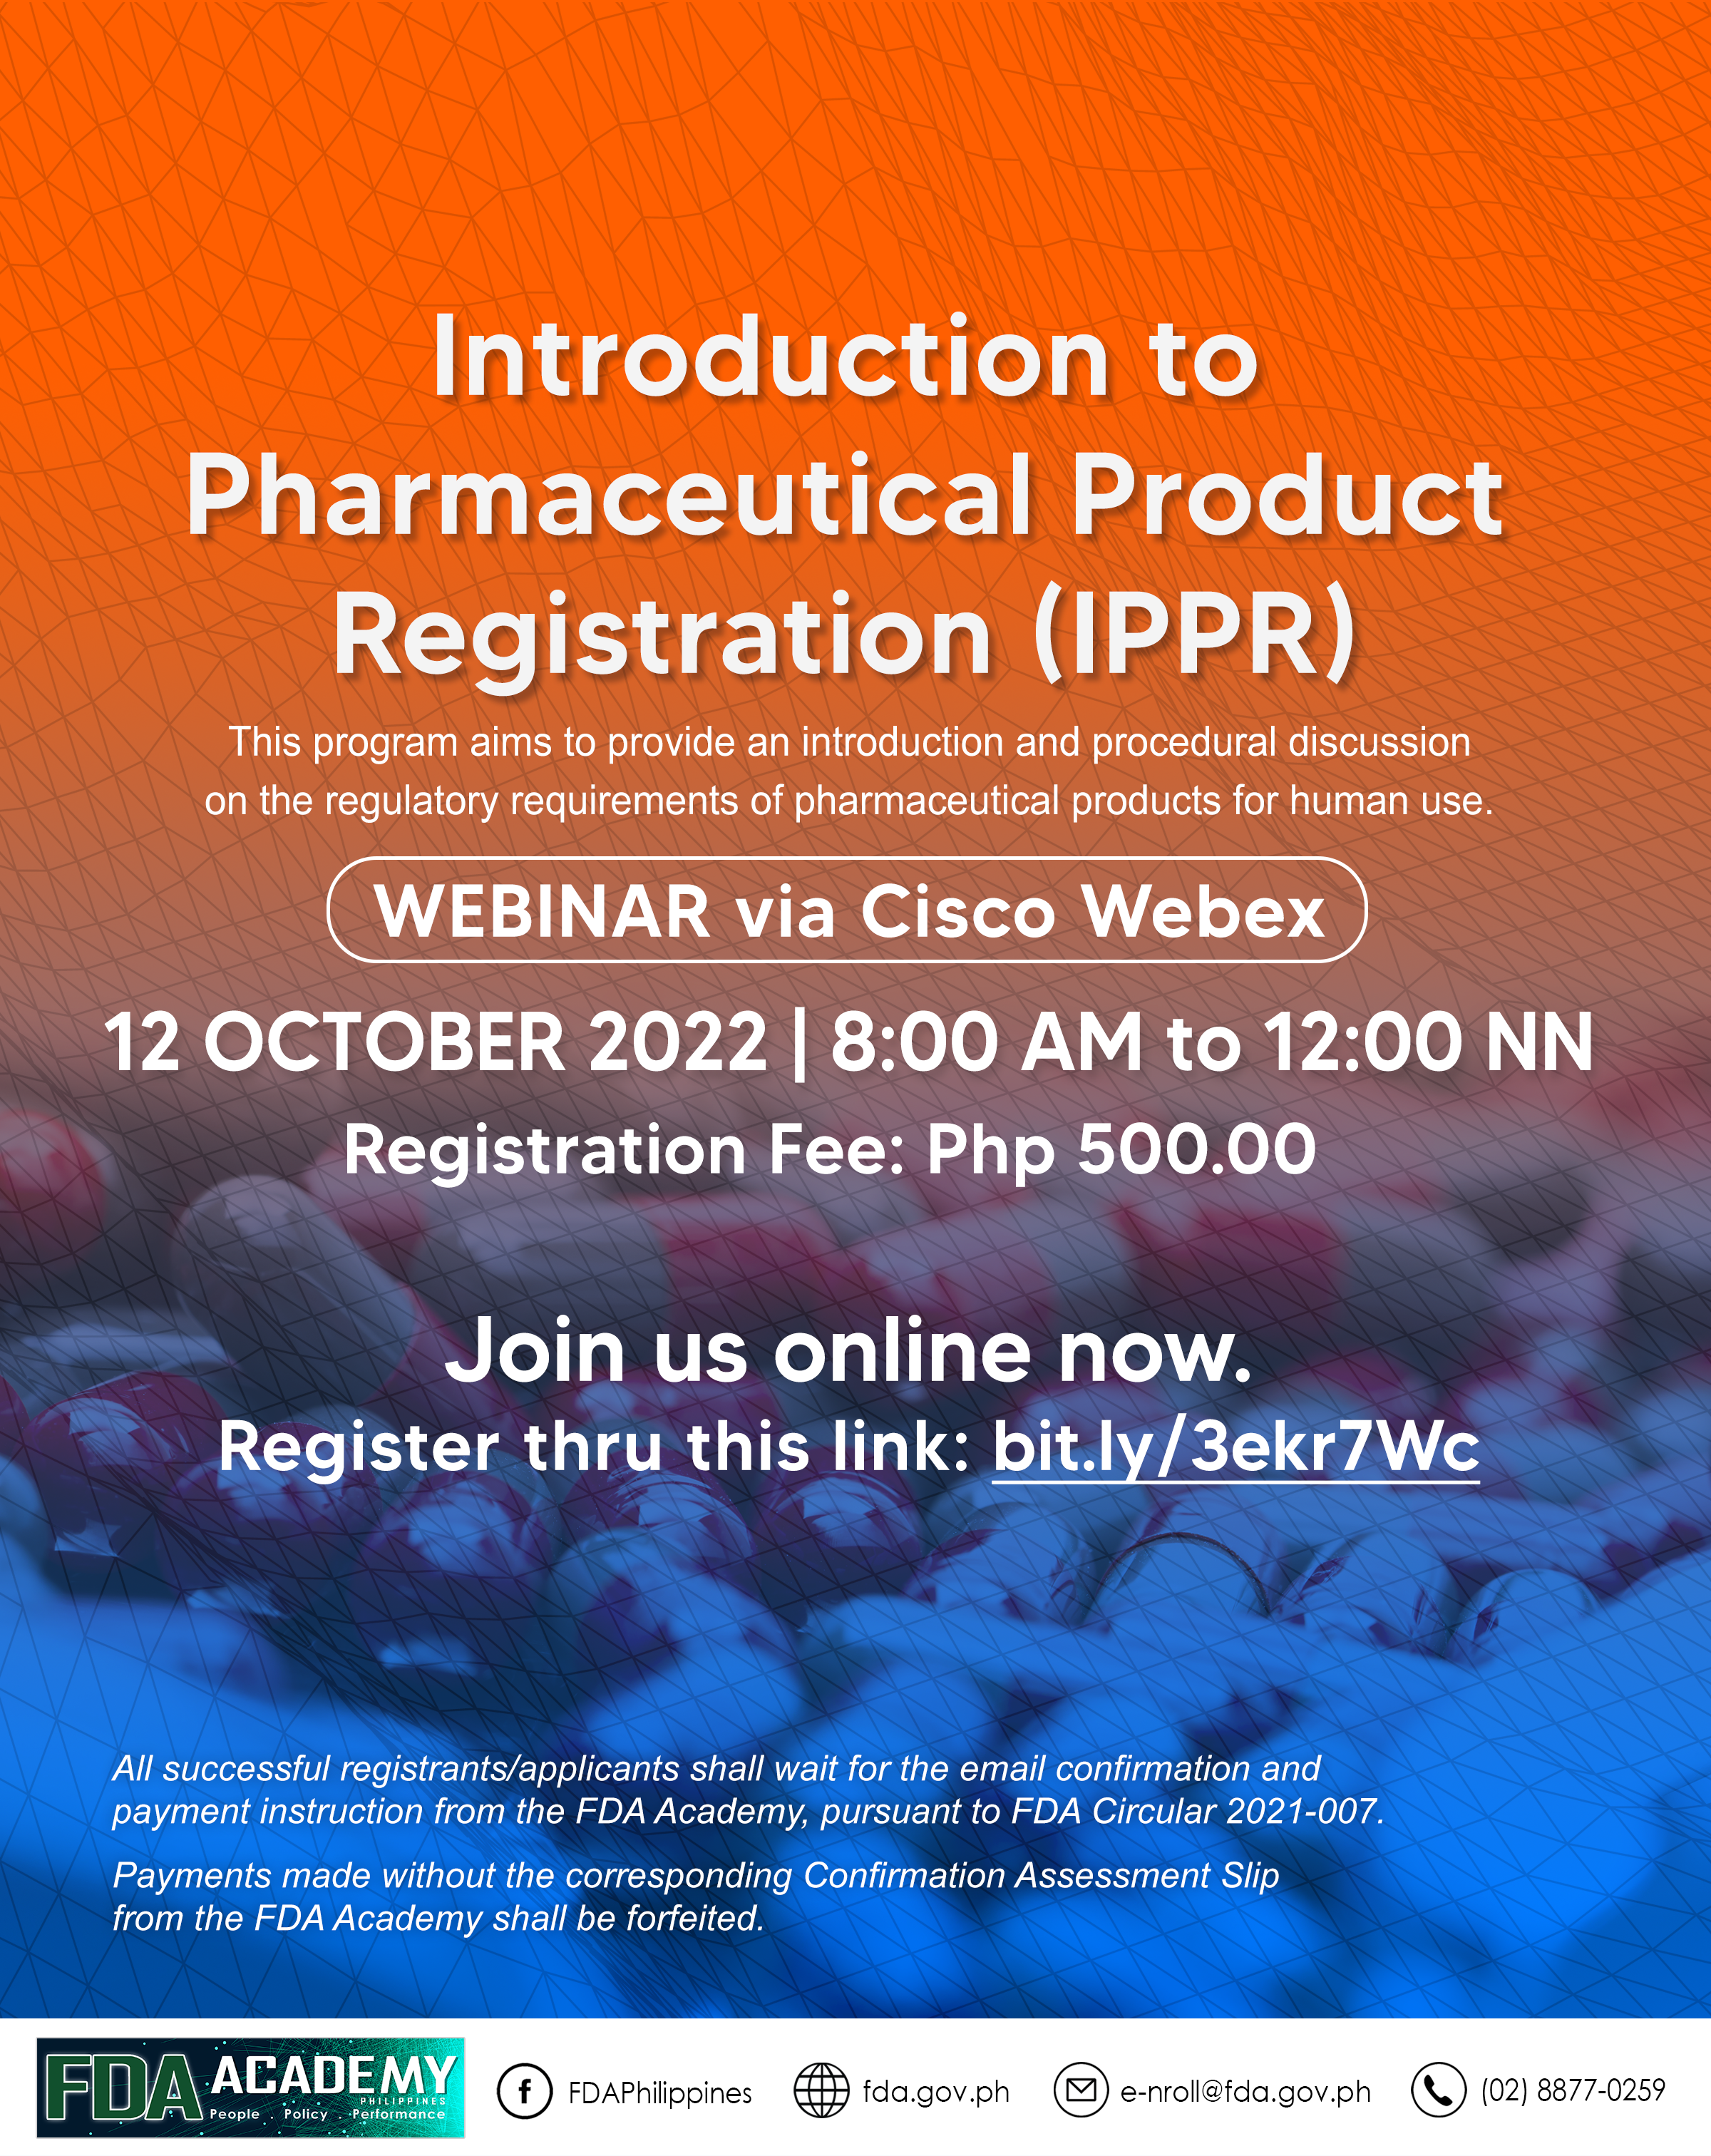 Announcement || INTRODUCTION TO PHARMACEUTICAL PRODUCT REGISTRATION (IPPR)